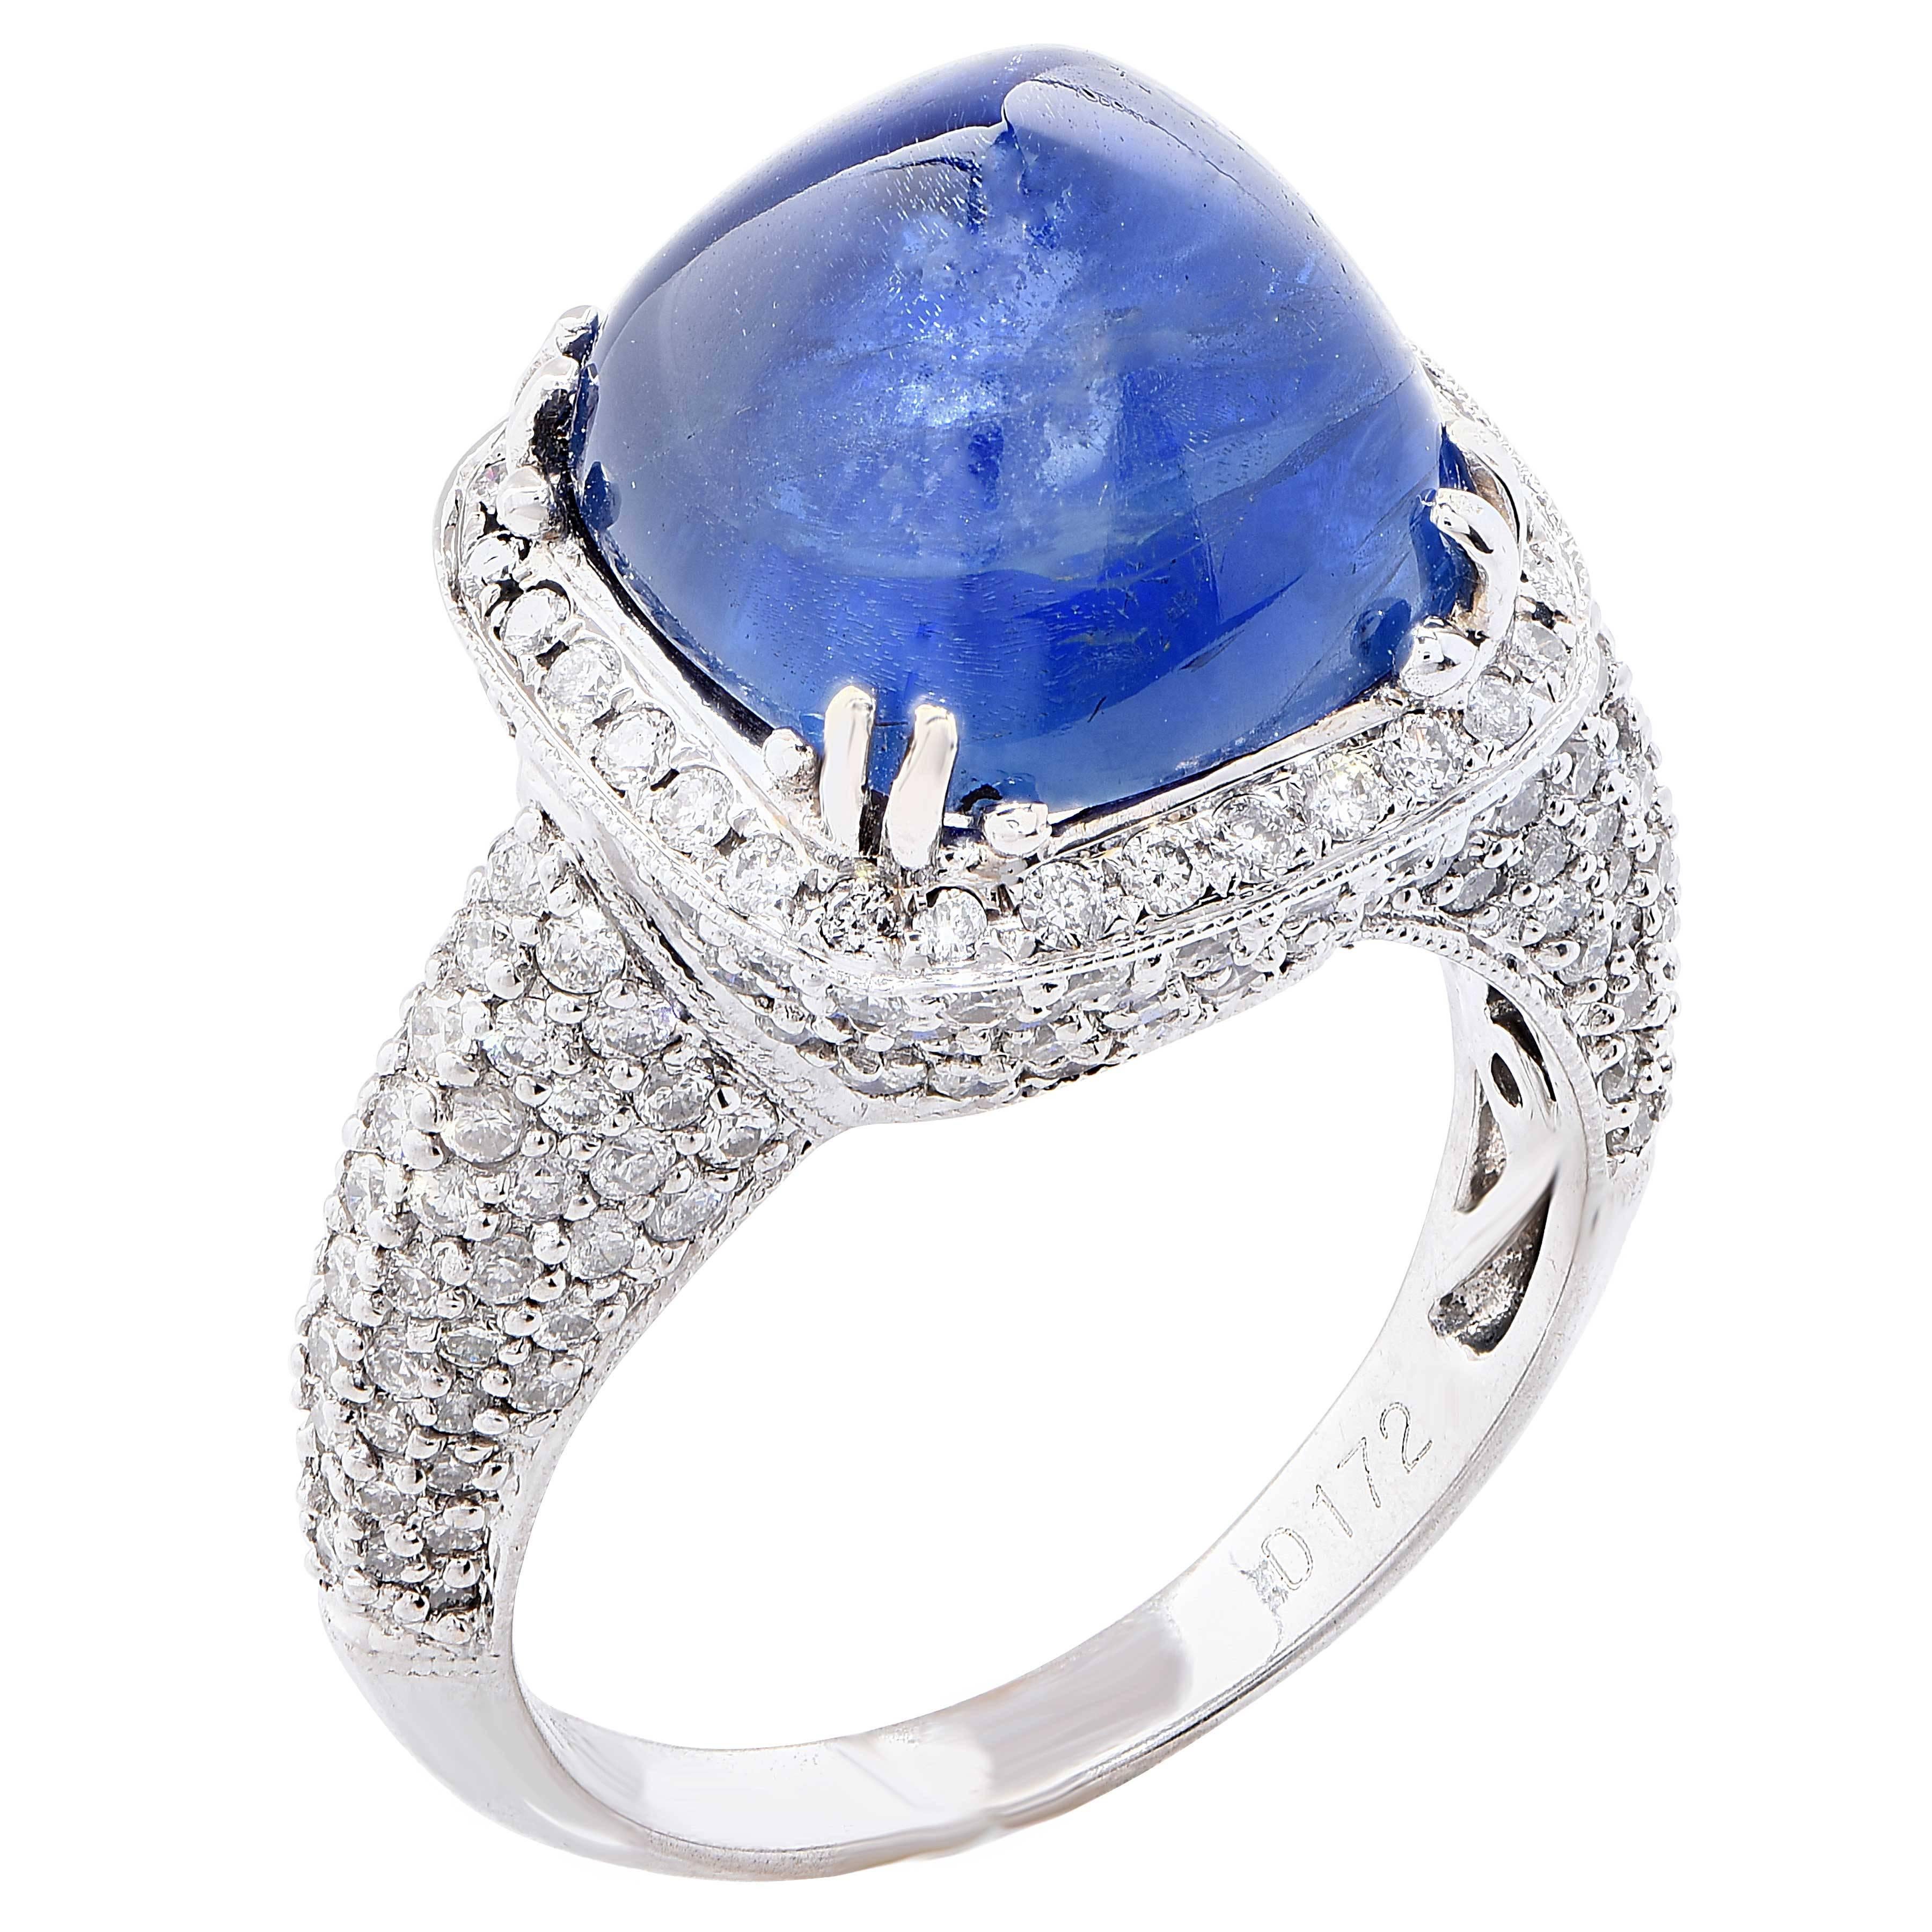 10.48 Carat Natural Sugarloaf Sapphire and Diamond White Gold Ring